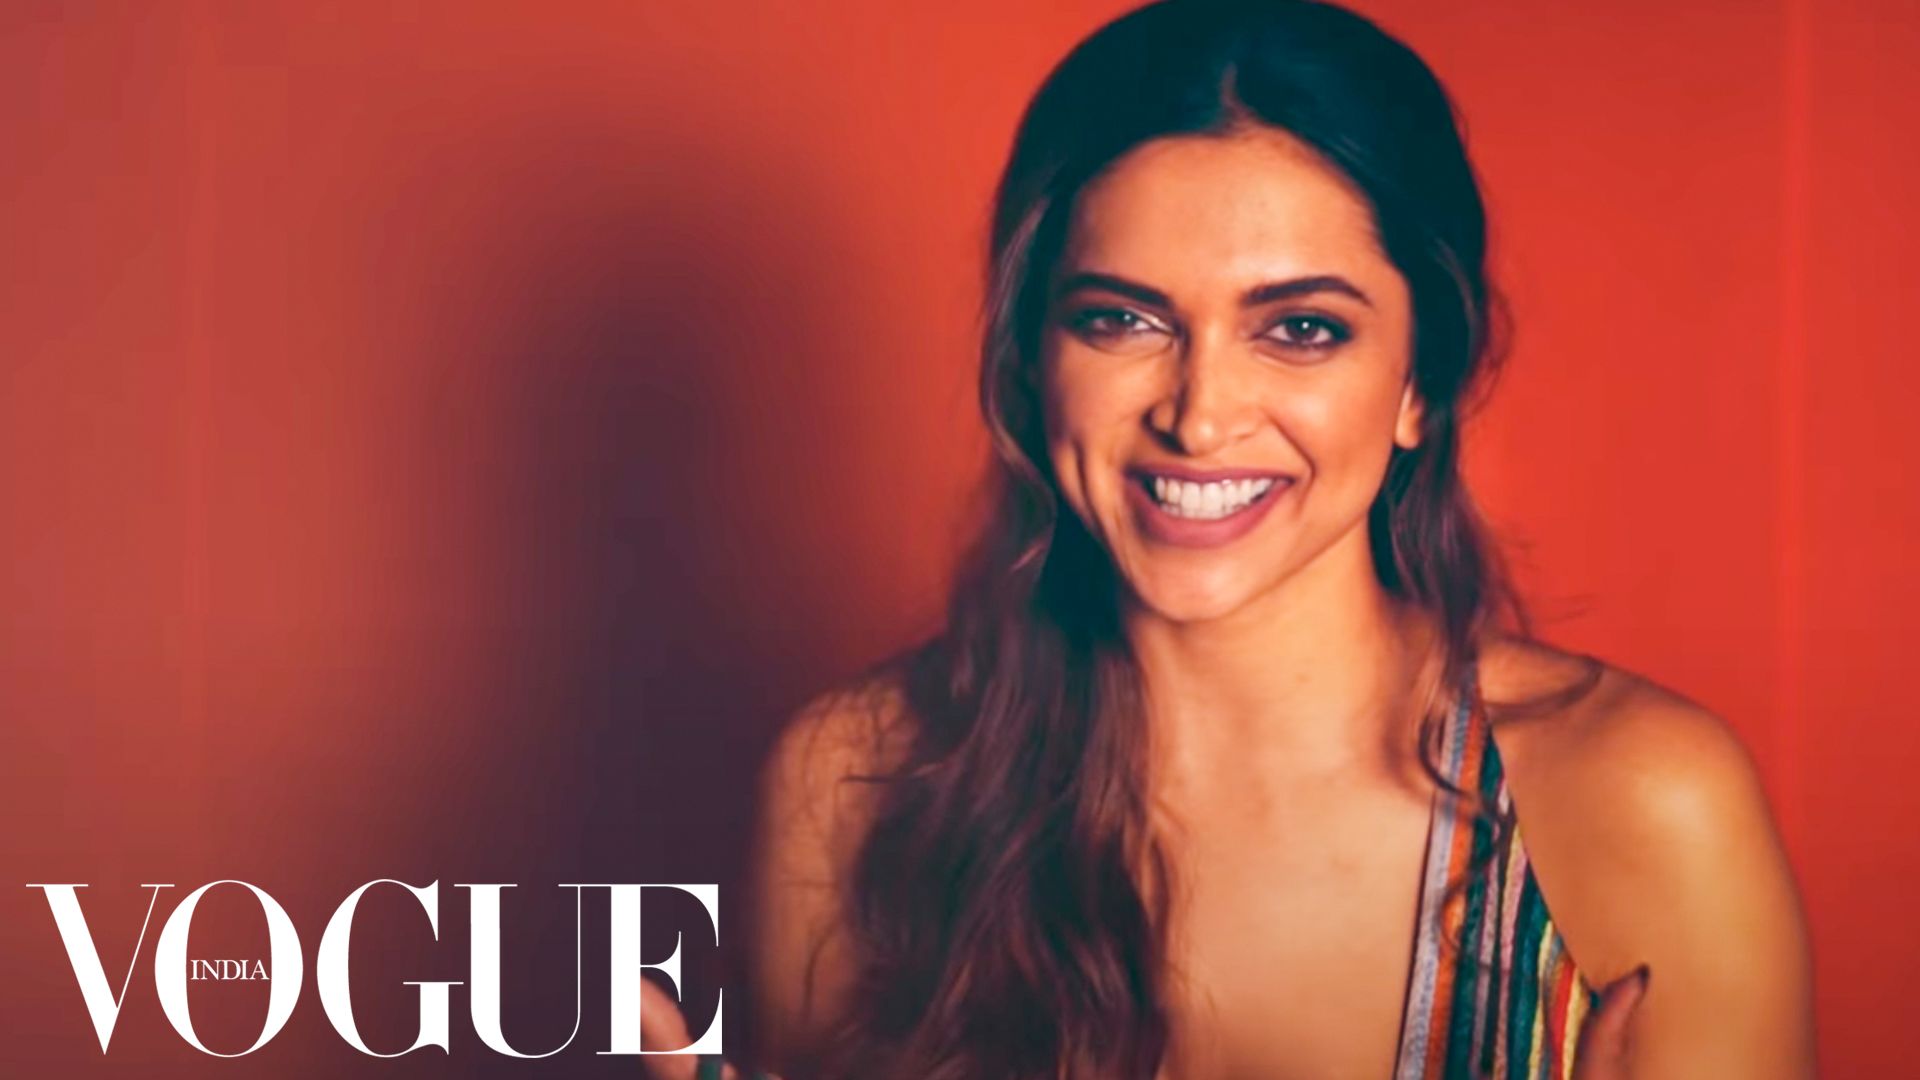 Deepika Padukone on the cover of Vogue India Digital Oct 2021  #LevisxDeepikaPadukone . . . . . . . . . . . . . . #deepikapadukone #deepika…